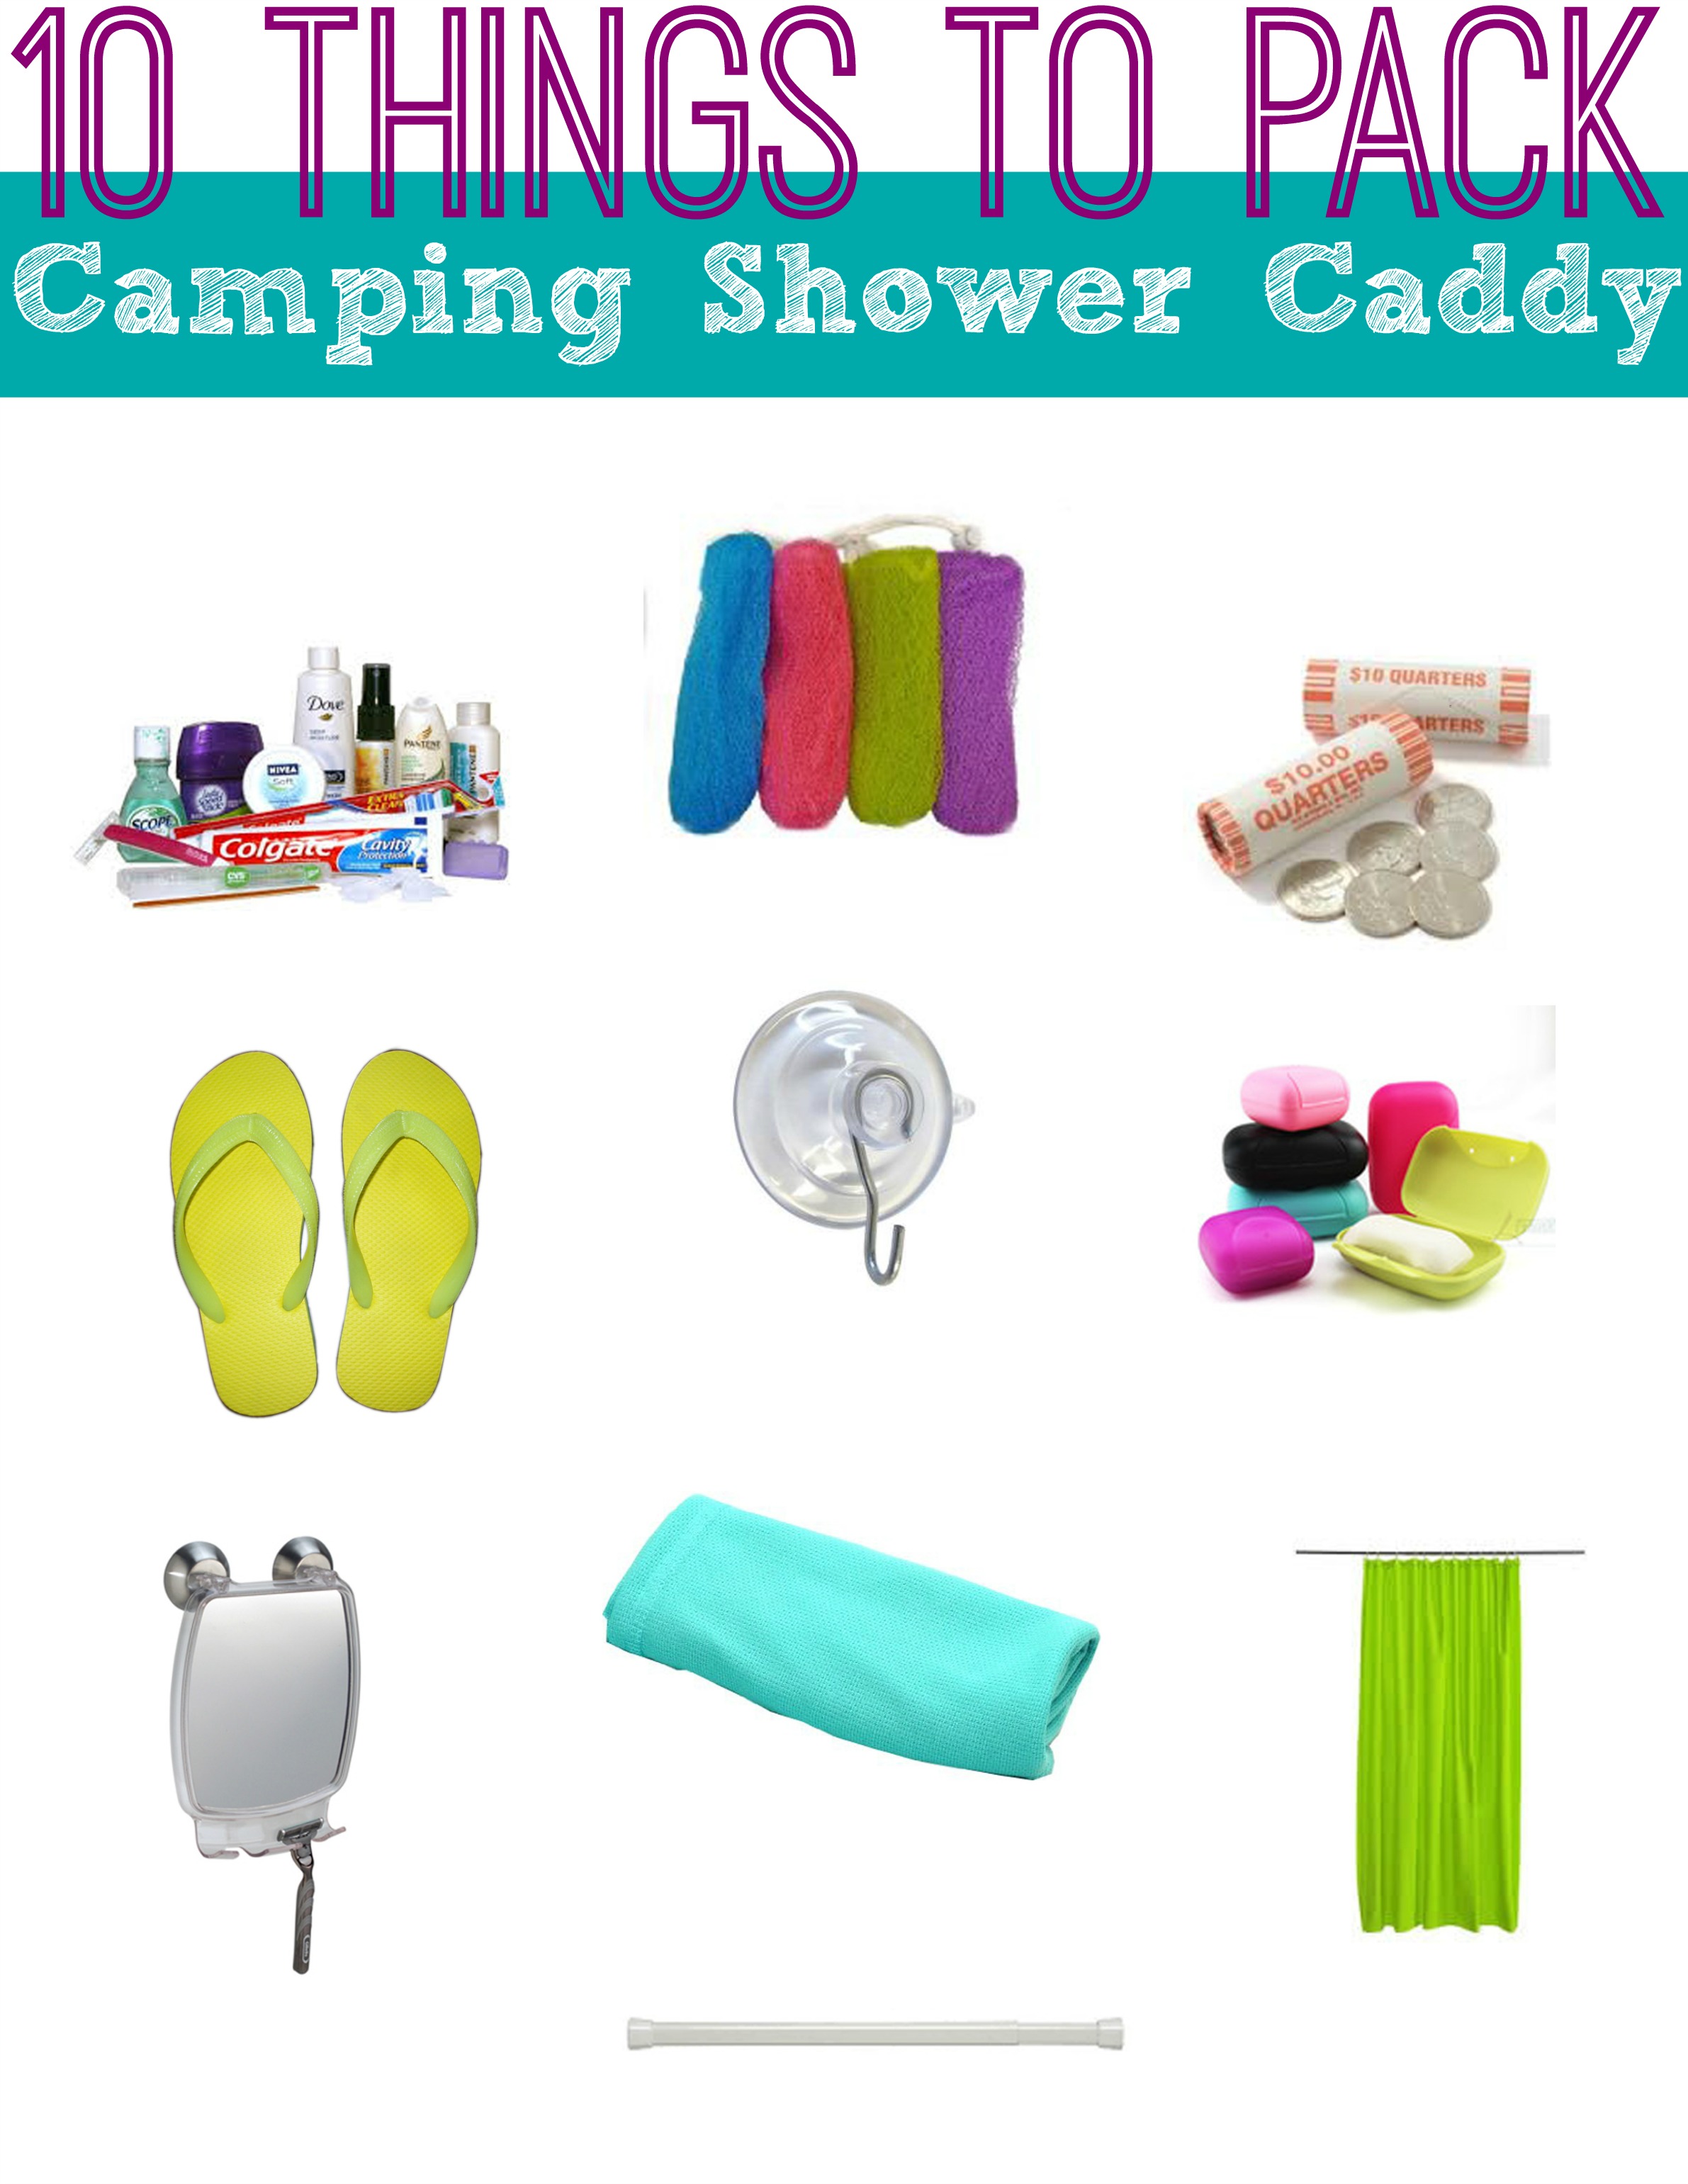 http://www.suitcasesandsippycups.com/wp-content/uploads/2015/06/Shower-Caddy-for-Camping-1.jpg